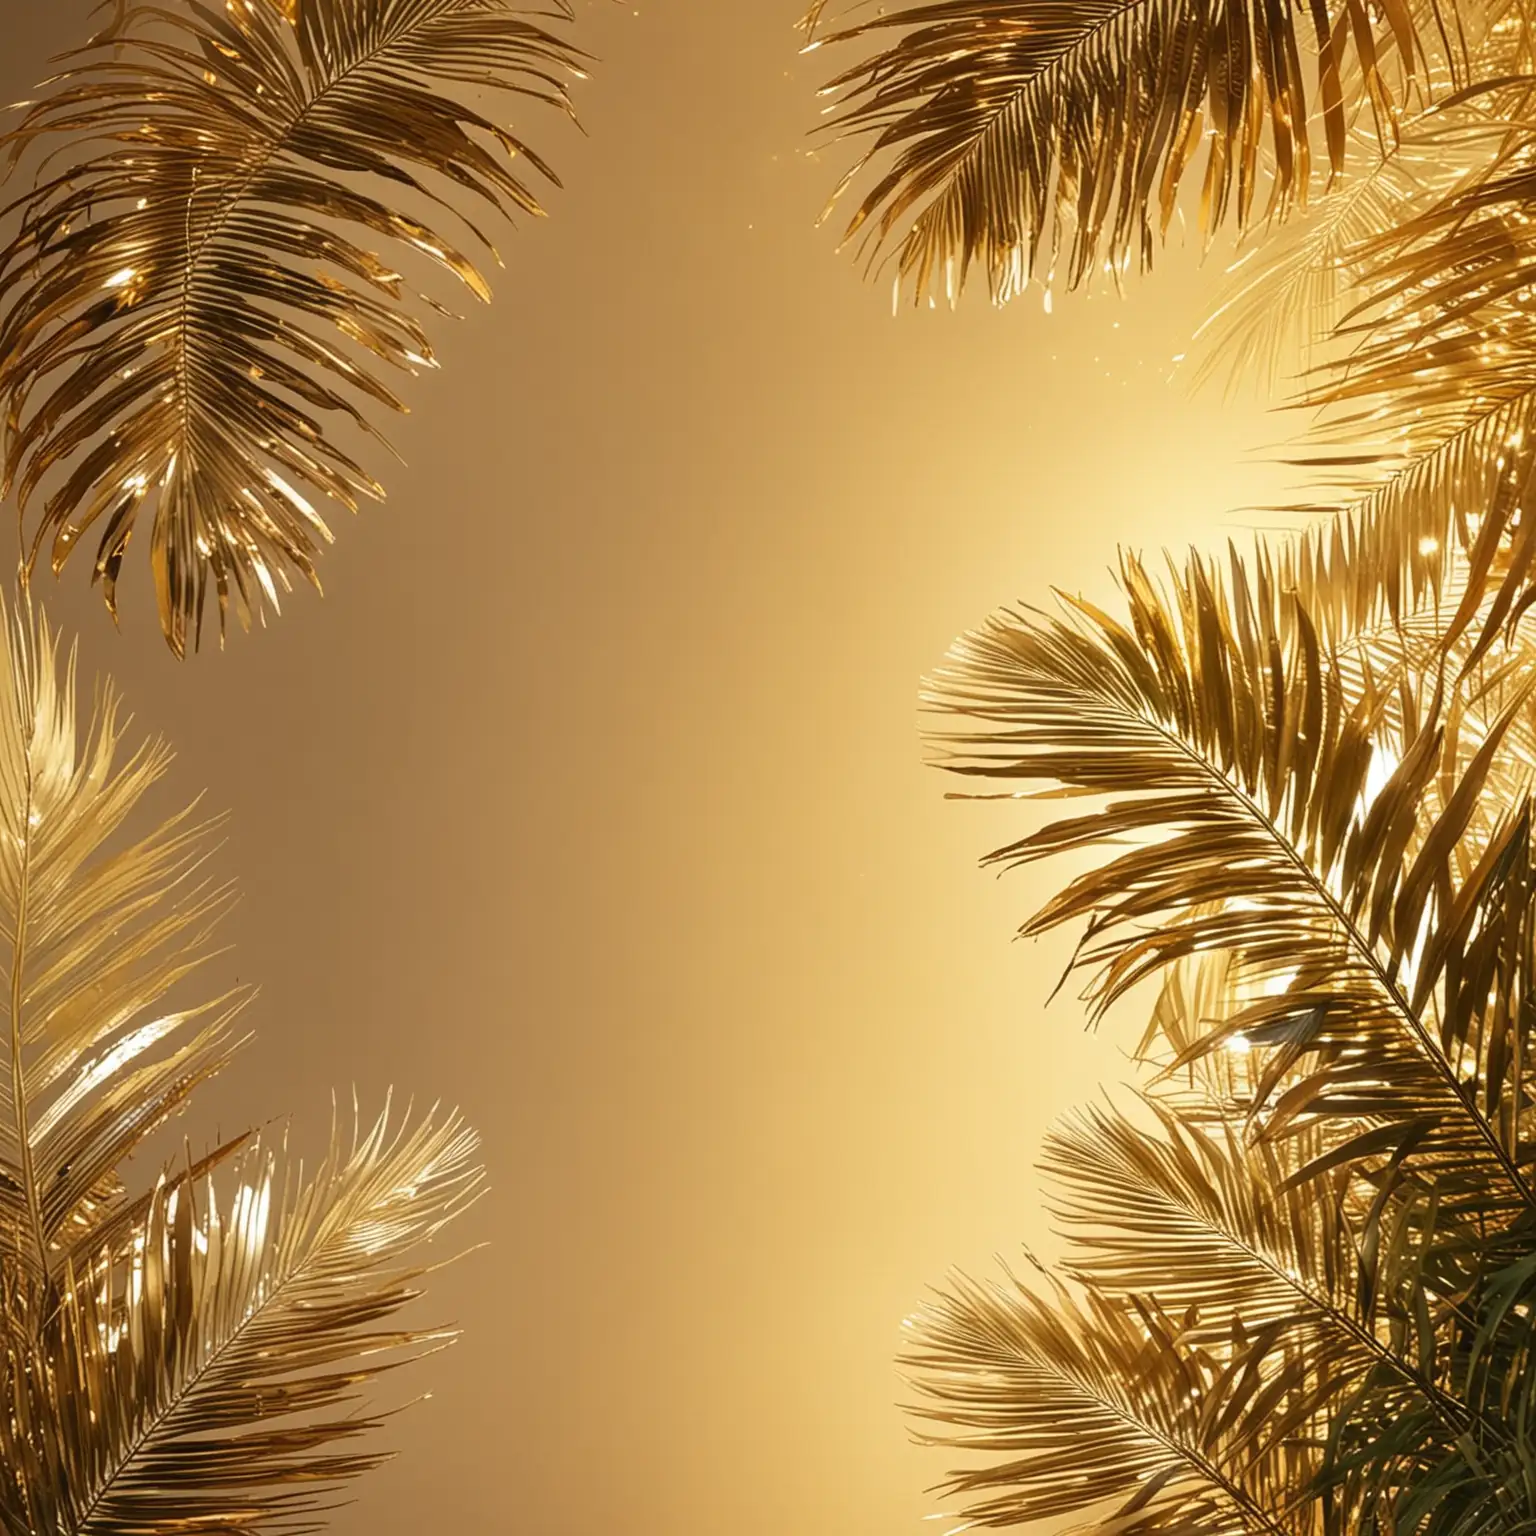 create an image that is the essence of spring time, with gold light effects, and palm leaves